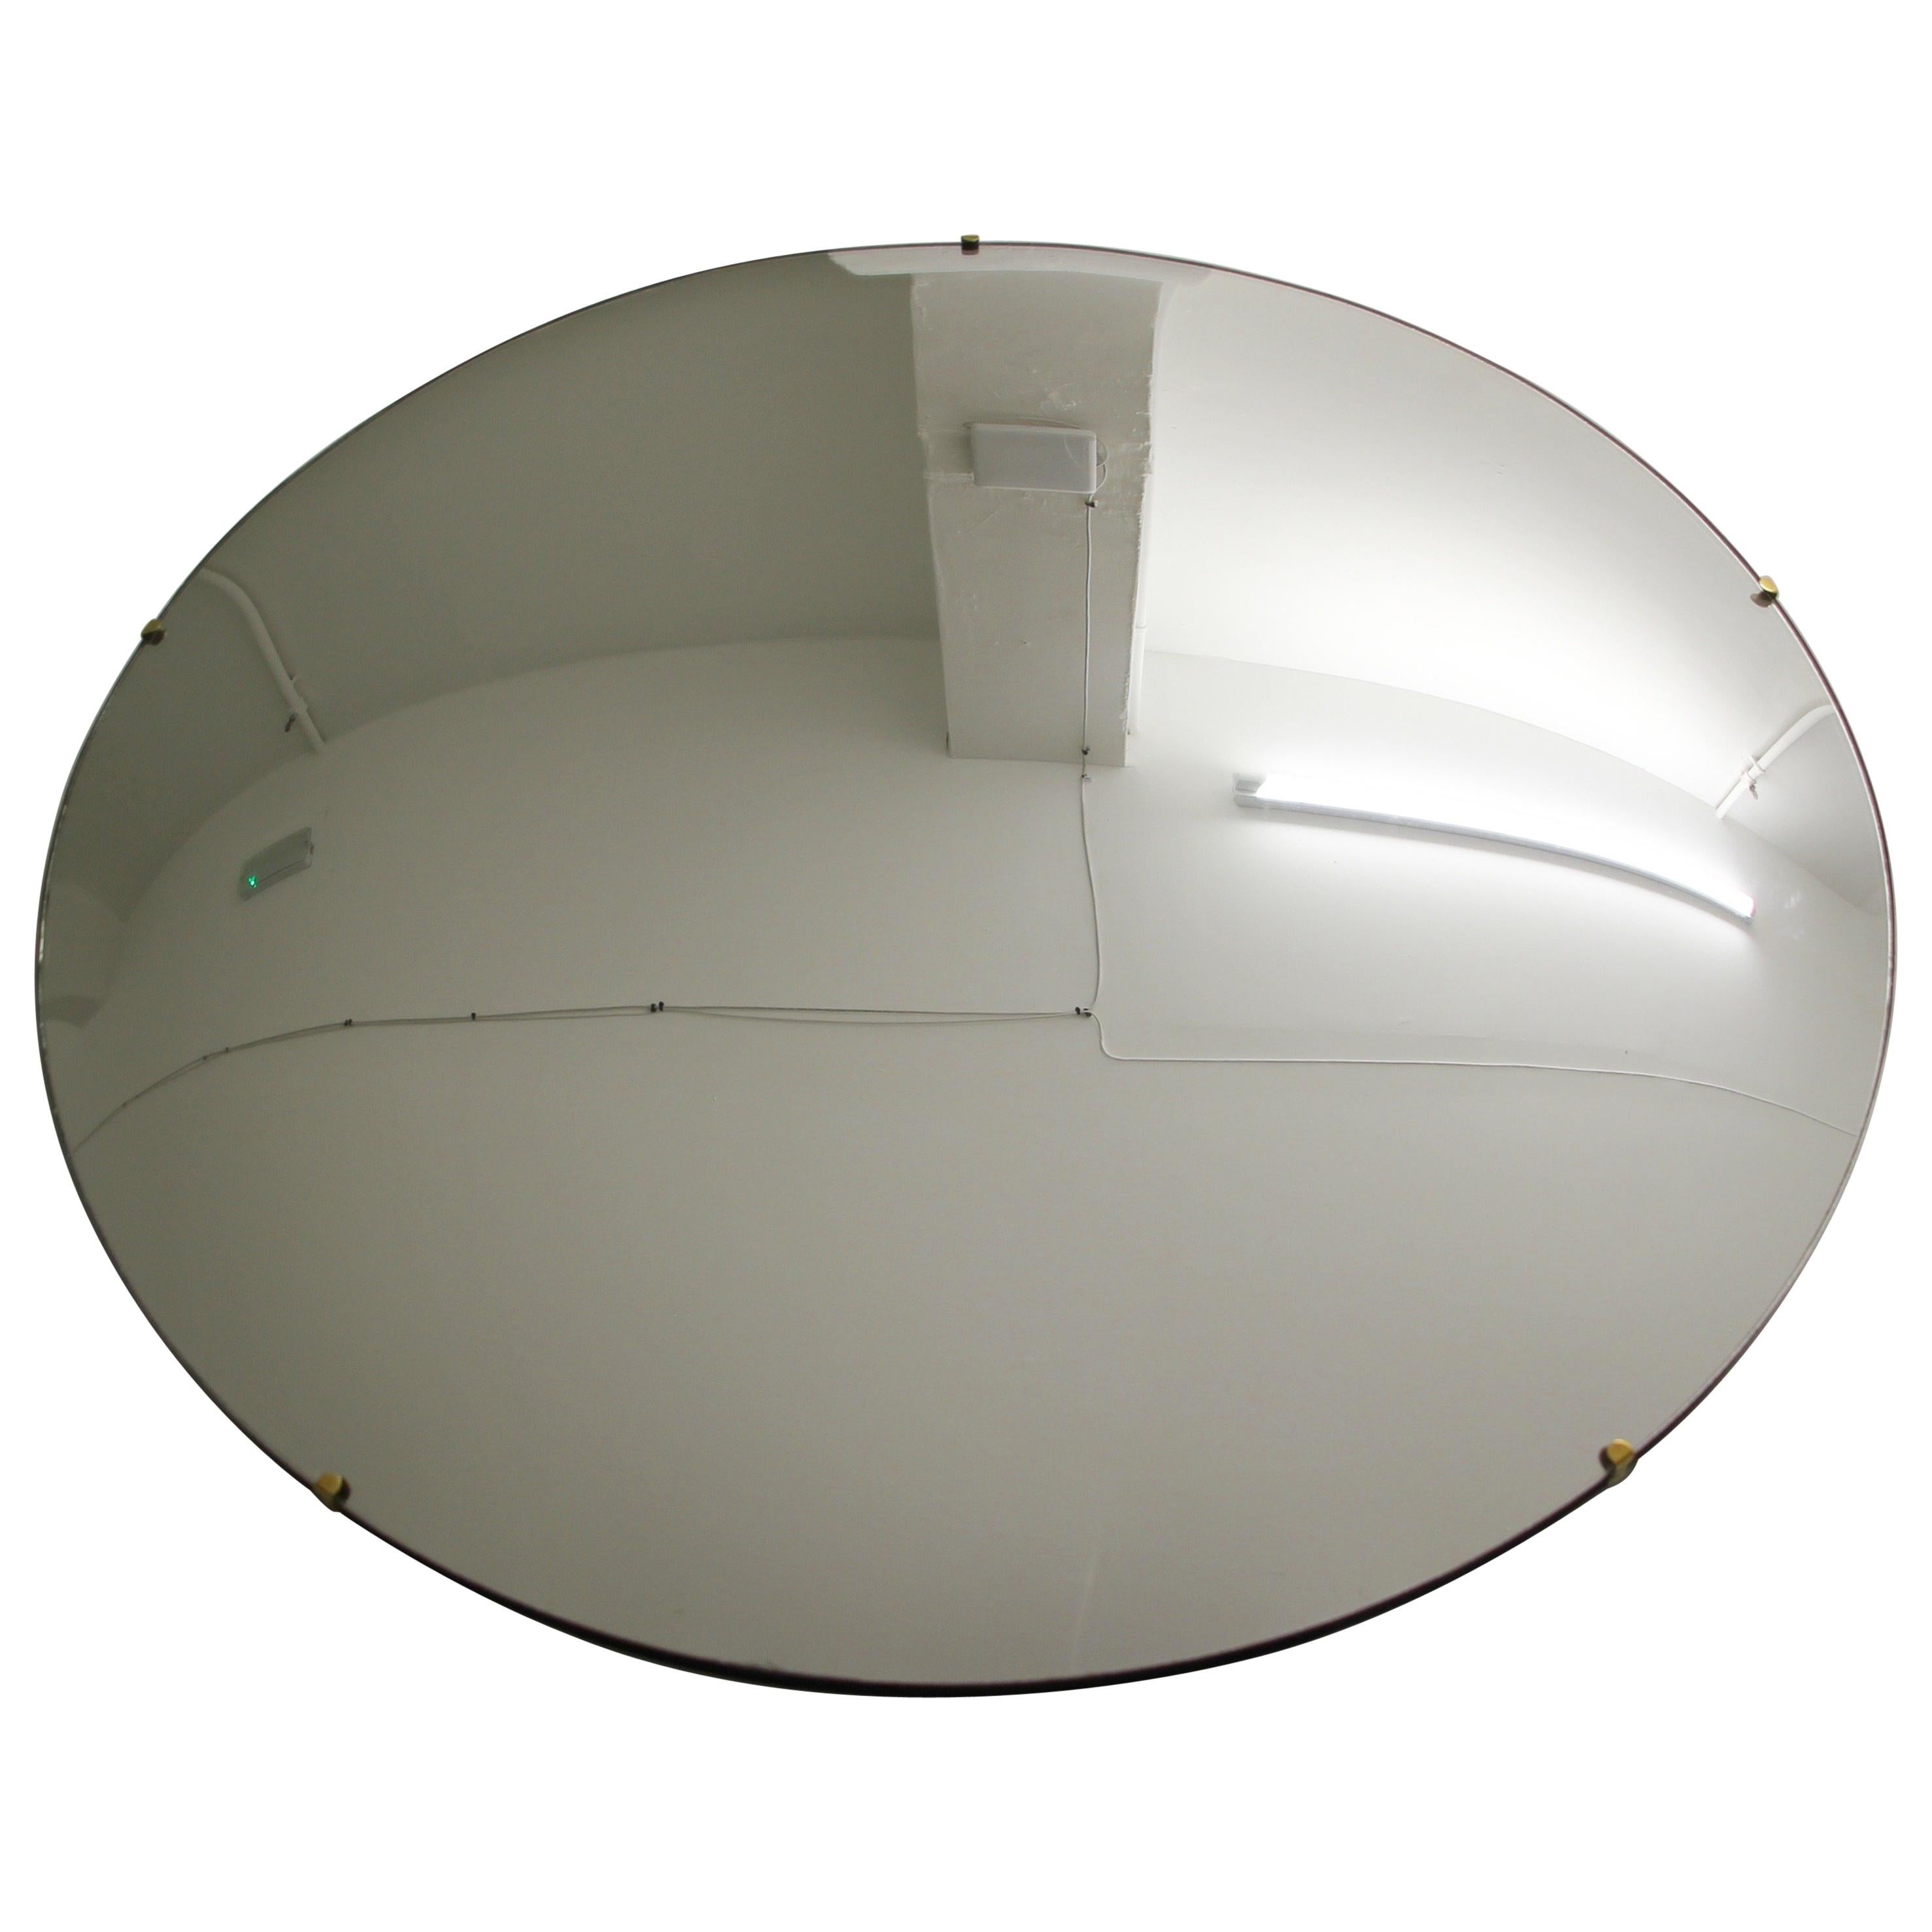 Each Orbis™ convex mirror is handcrafted. Slight variations in dimensions, tint and finish are characteristics of such handcrafted work. These characteristics enhance the beauty of the mirrors and make each piece unique.

Backing fitted with a z-bar